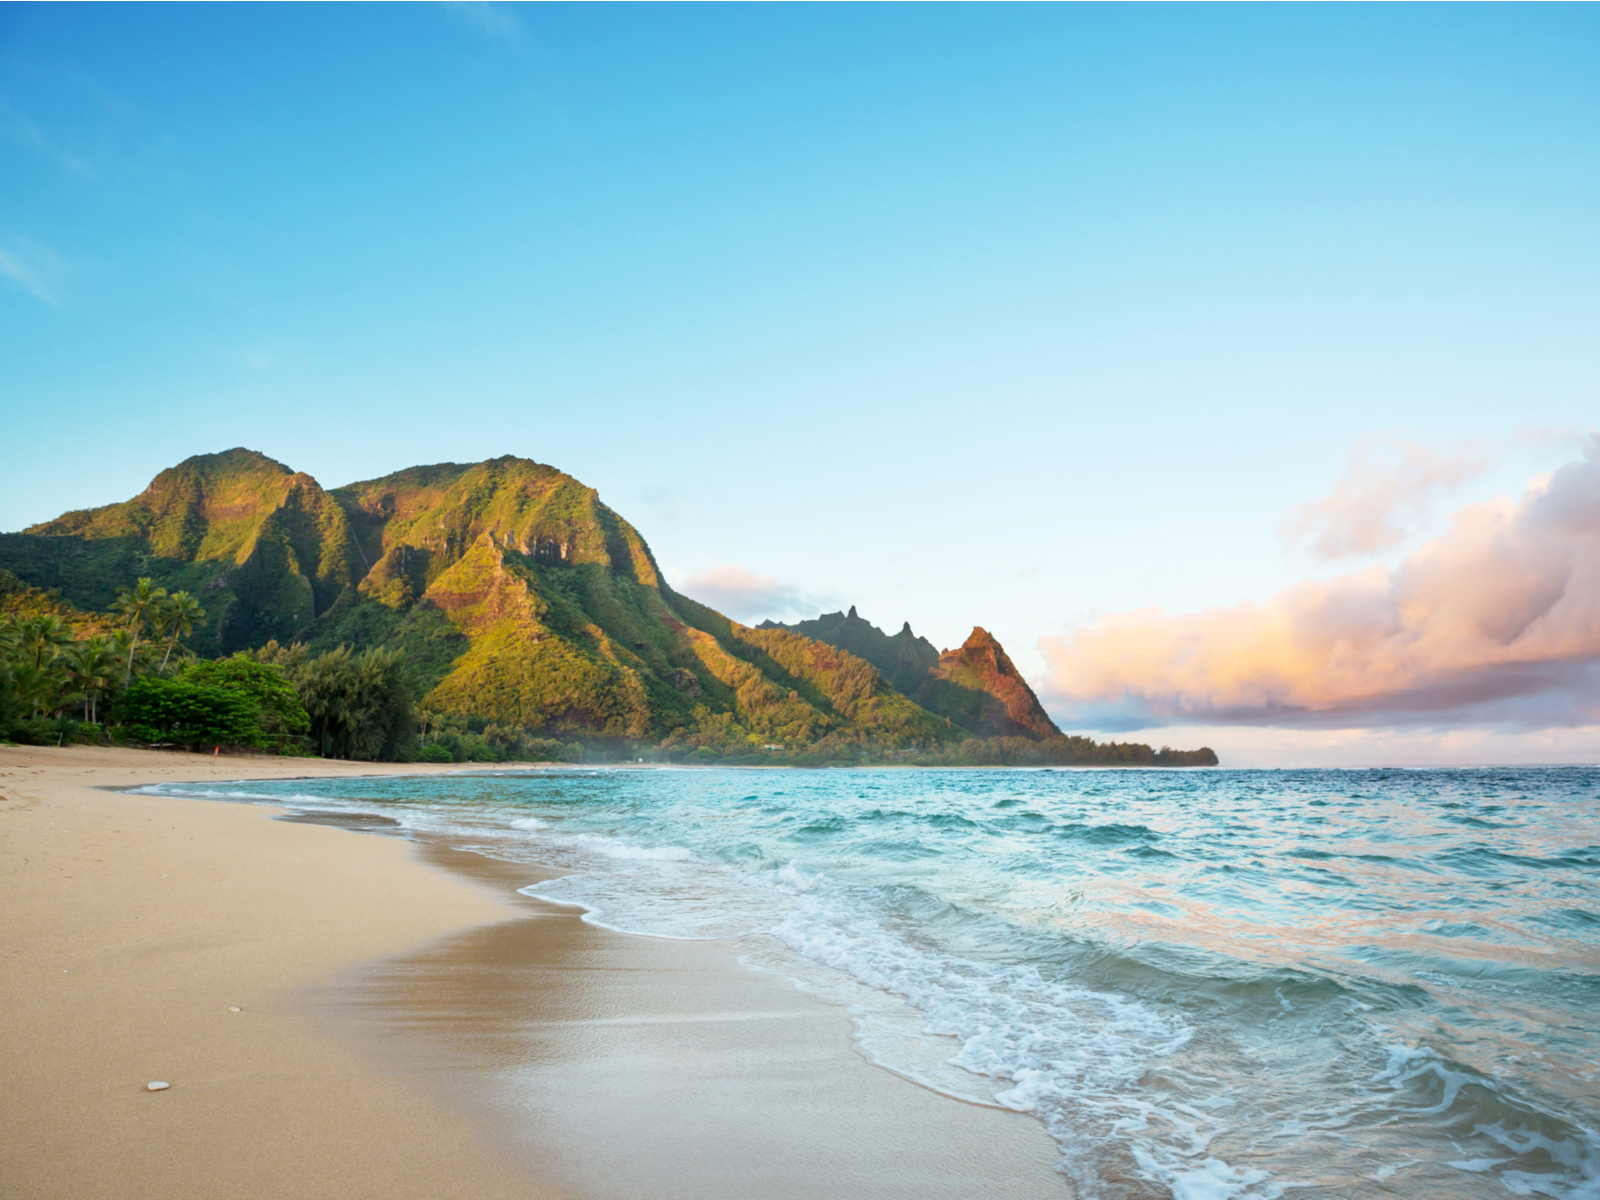 Gorgeous view from one of the best island vacations, tunnels beach in Kauai